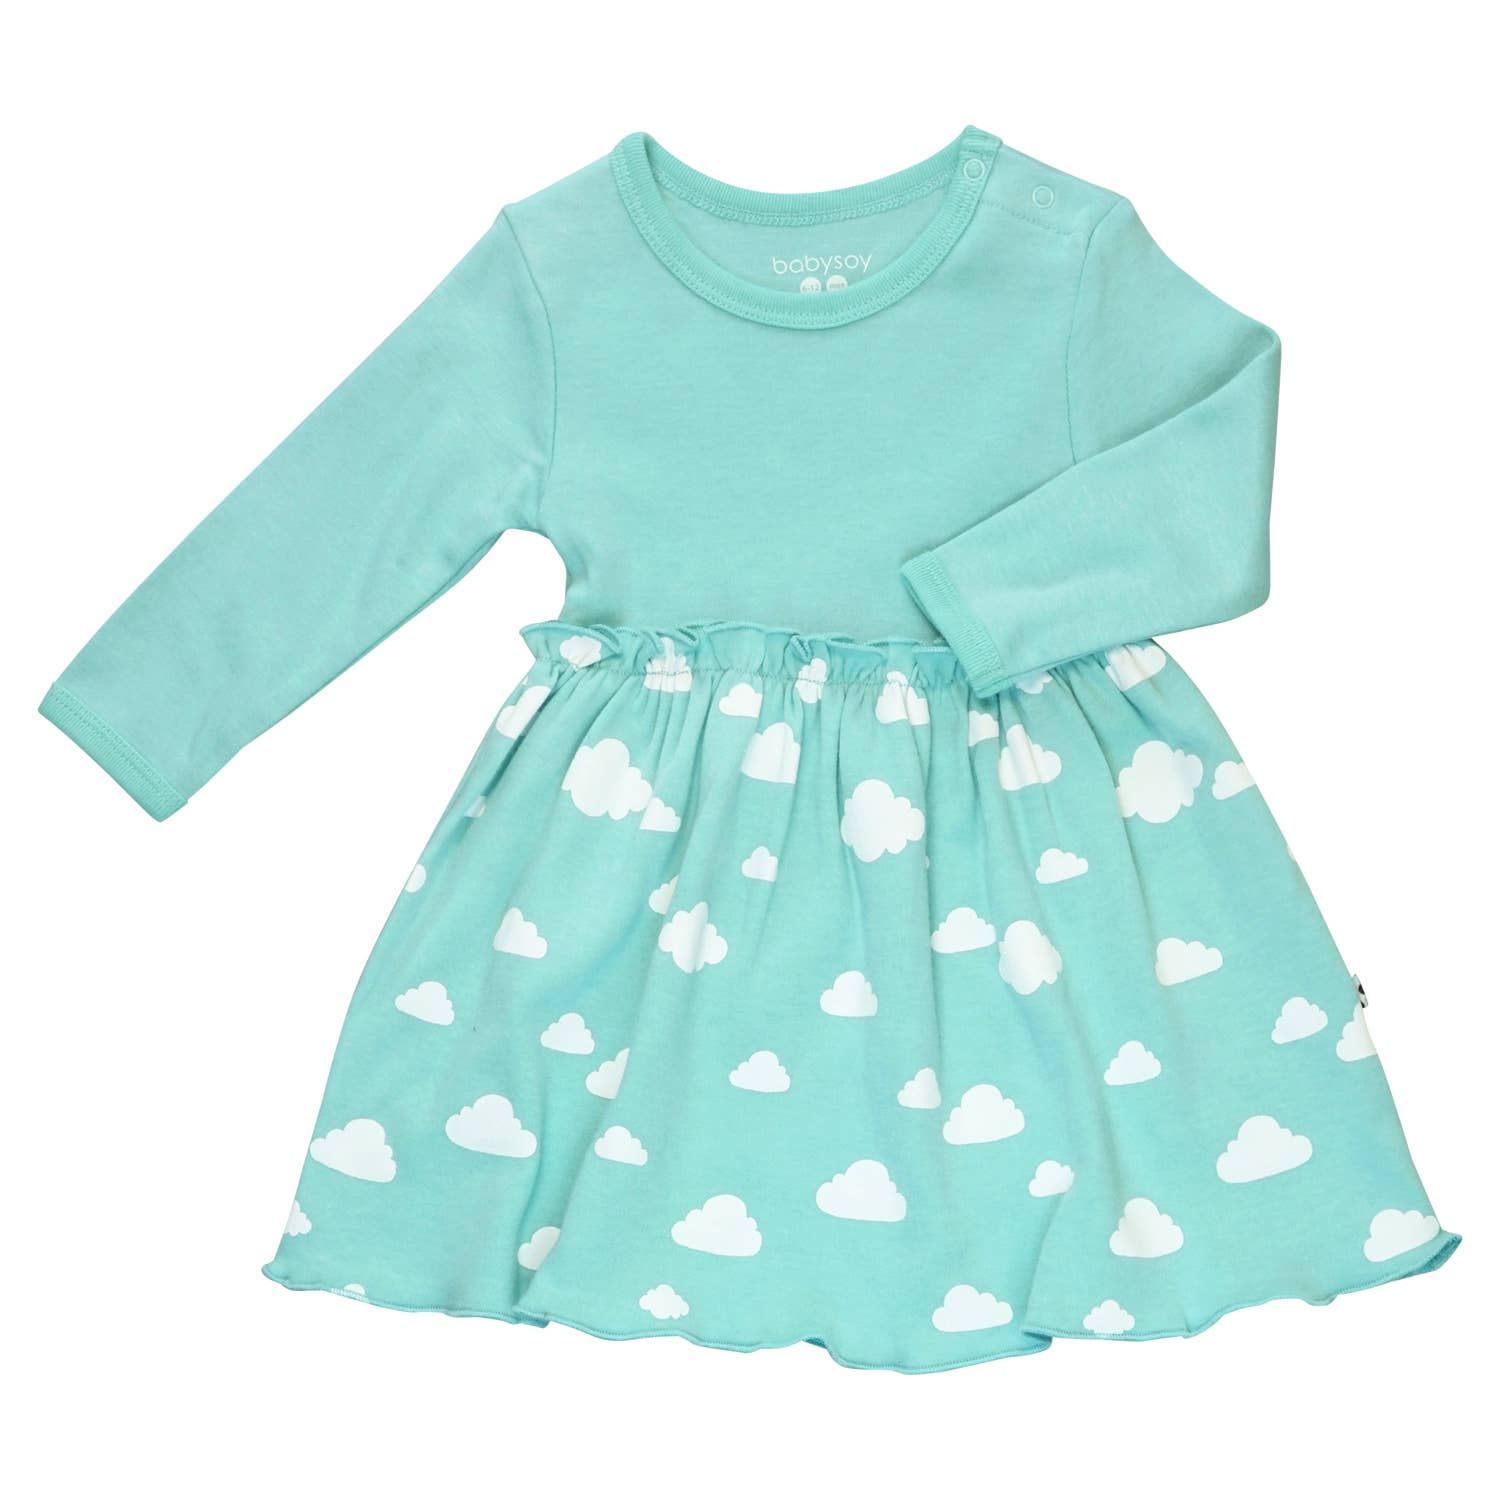 Babysoy - Organic Cotton Twirl Dress Clouds Natural Kids Clothing All Things Being Eco Chilliwack